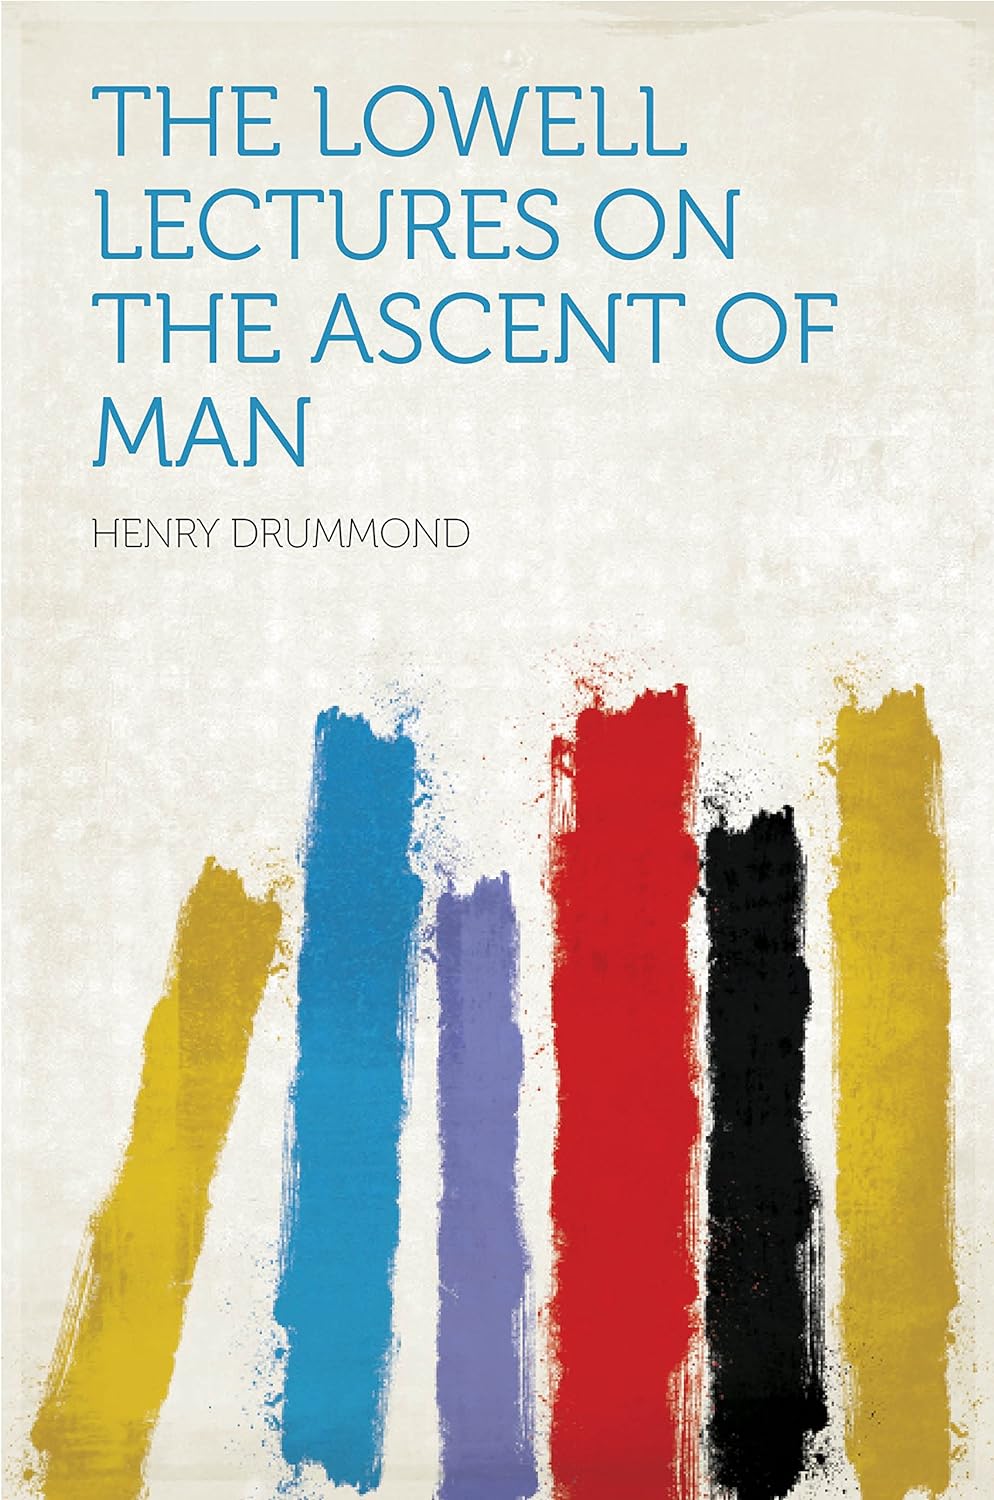 The Lowell Lectures on the Ascent of Man